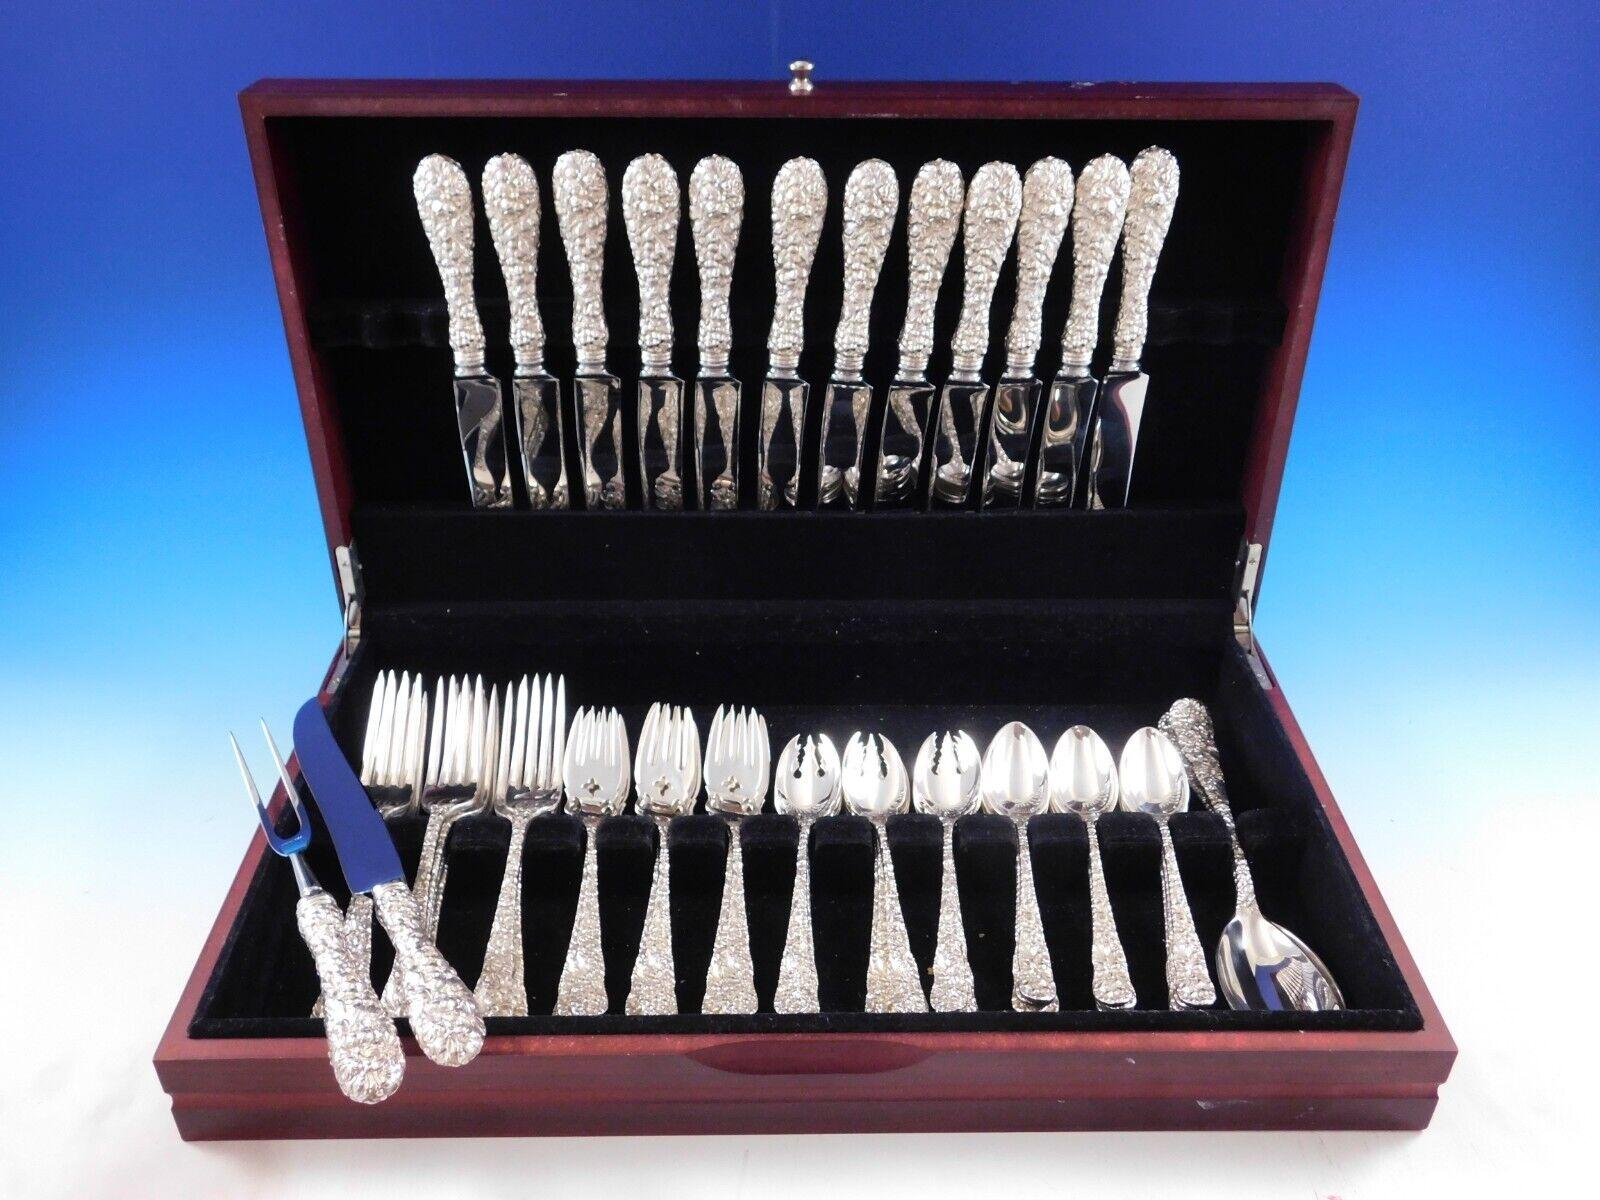 Dinner Size Chrysanthemum by Stieff sterling silver Flatware set - 64 pieces. This set includes:


12 Dinner Knives, 9 3/4